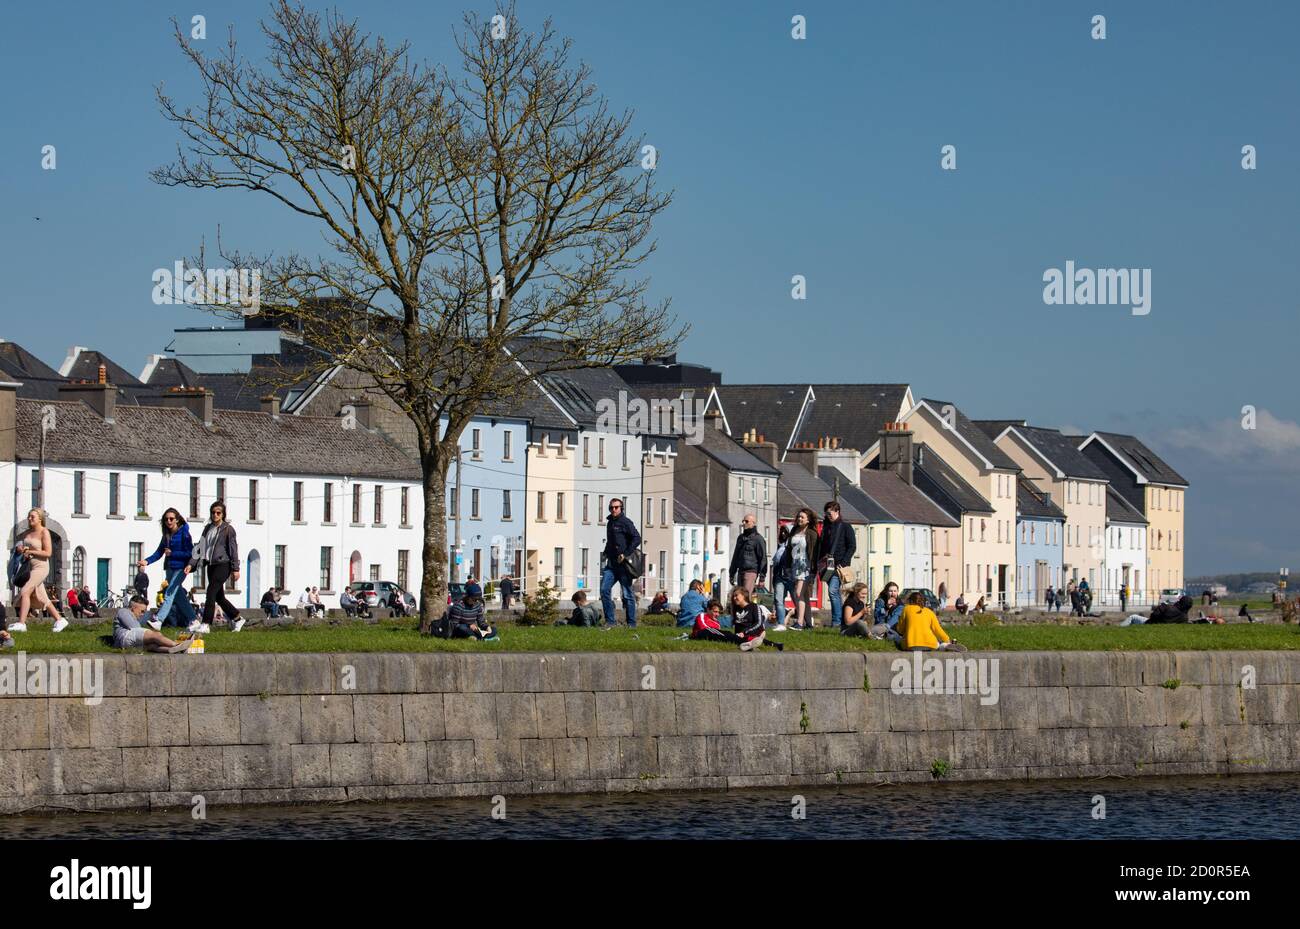 GALWAY CITY, IRELAND - 5th May, 2018: People enjoying a sunny spring day along the bank of Corrib river in the Claddagh area of Galway city, Ireland Stock Photo